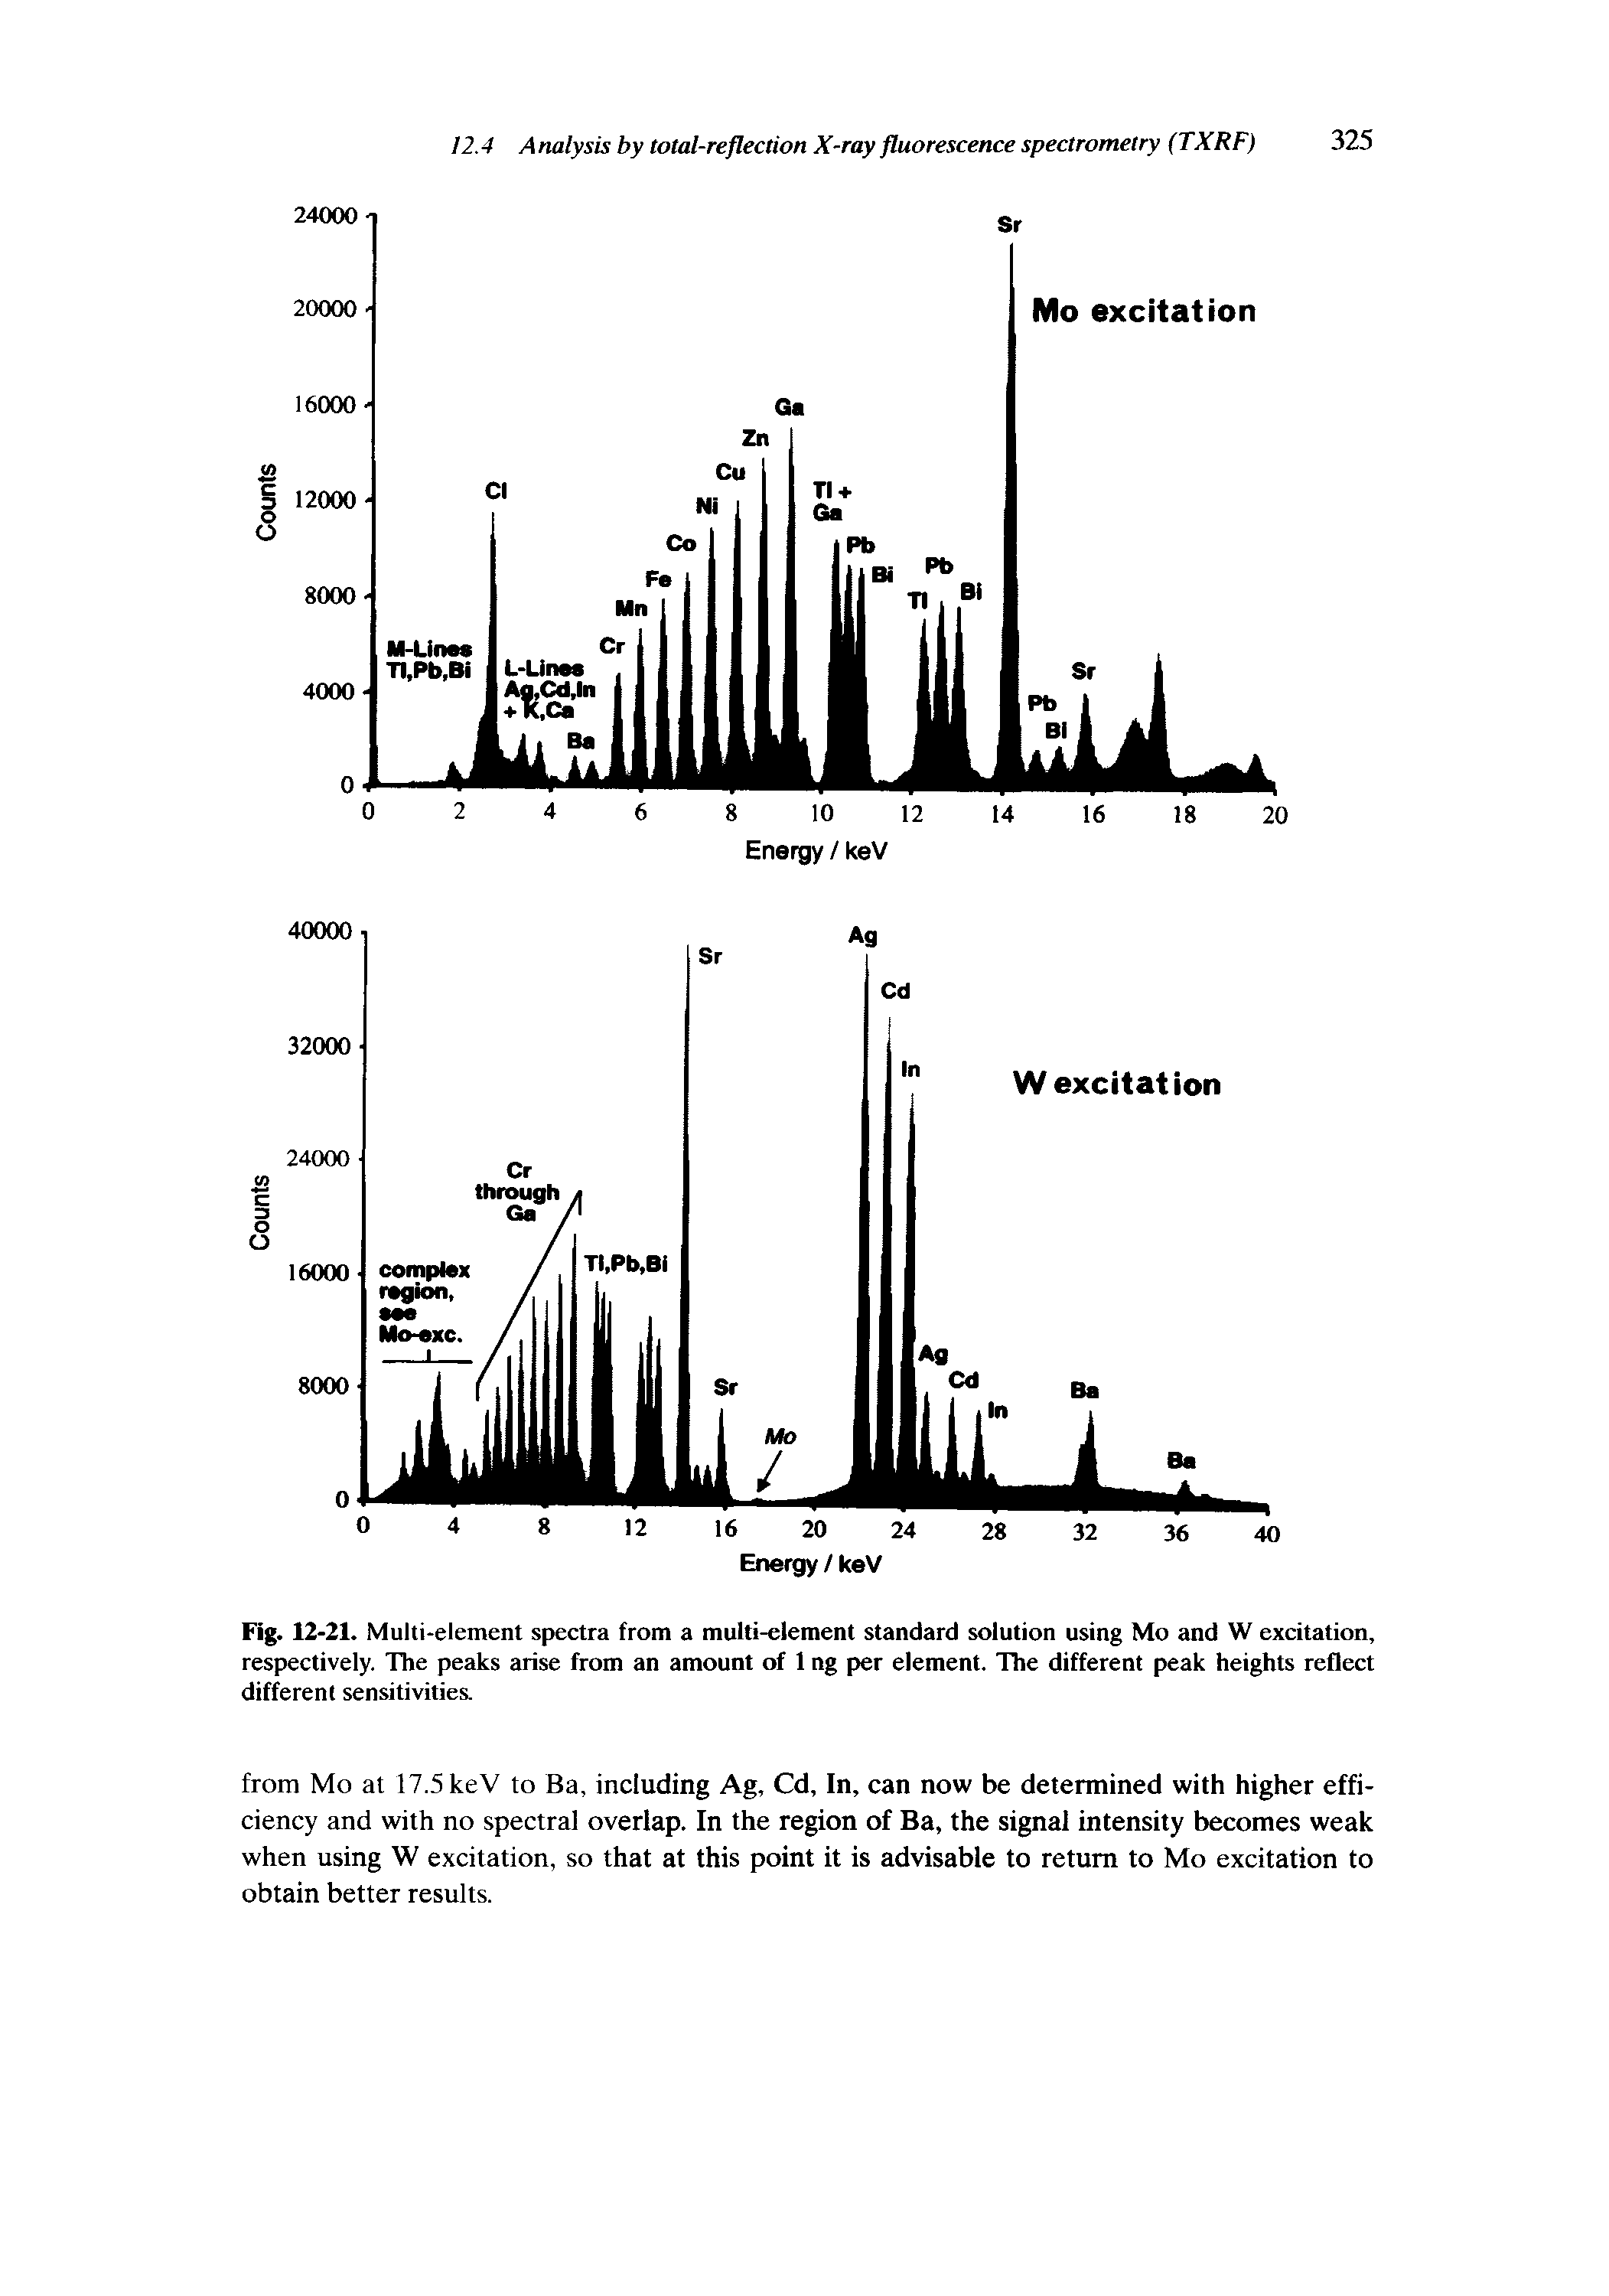 Fig. 12-21. Multi-element spectra from a multi-element standard solution using Mo and W excitation, respectively. The peaks arise from an amount of 1 ng per element. The different peak heights reflect different sensitivities.